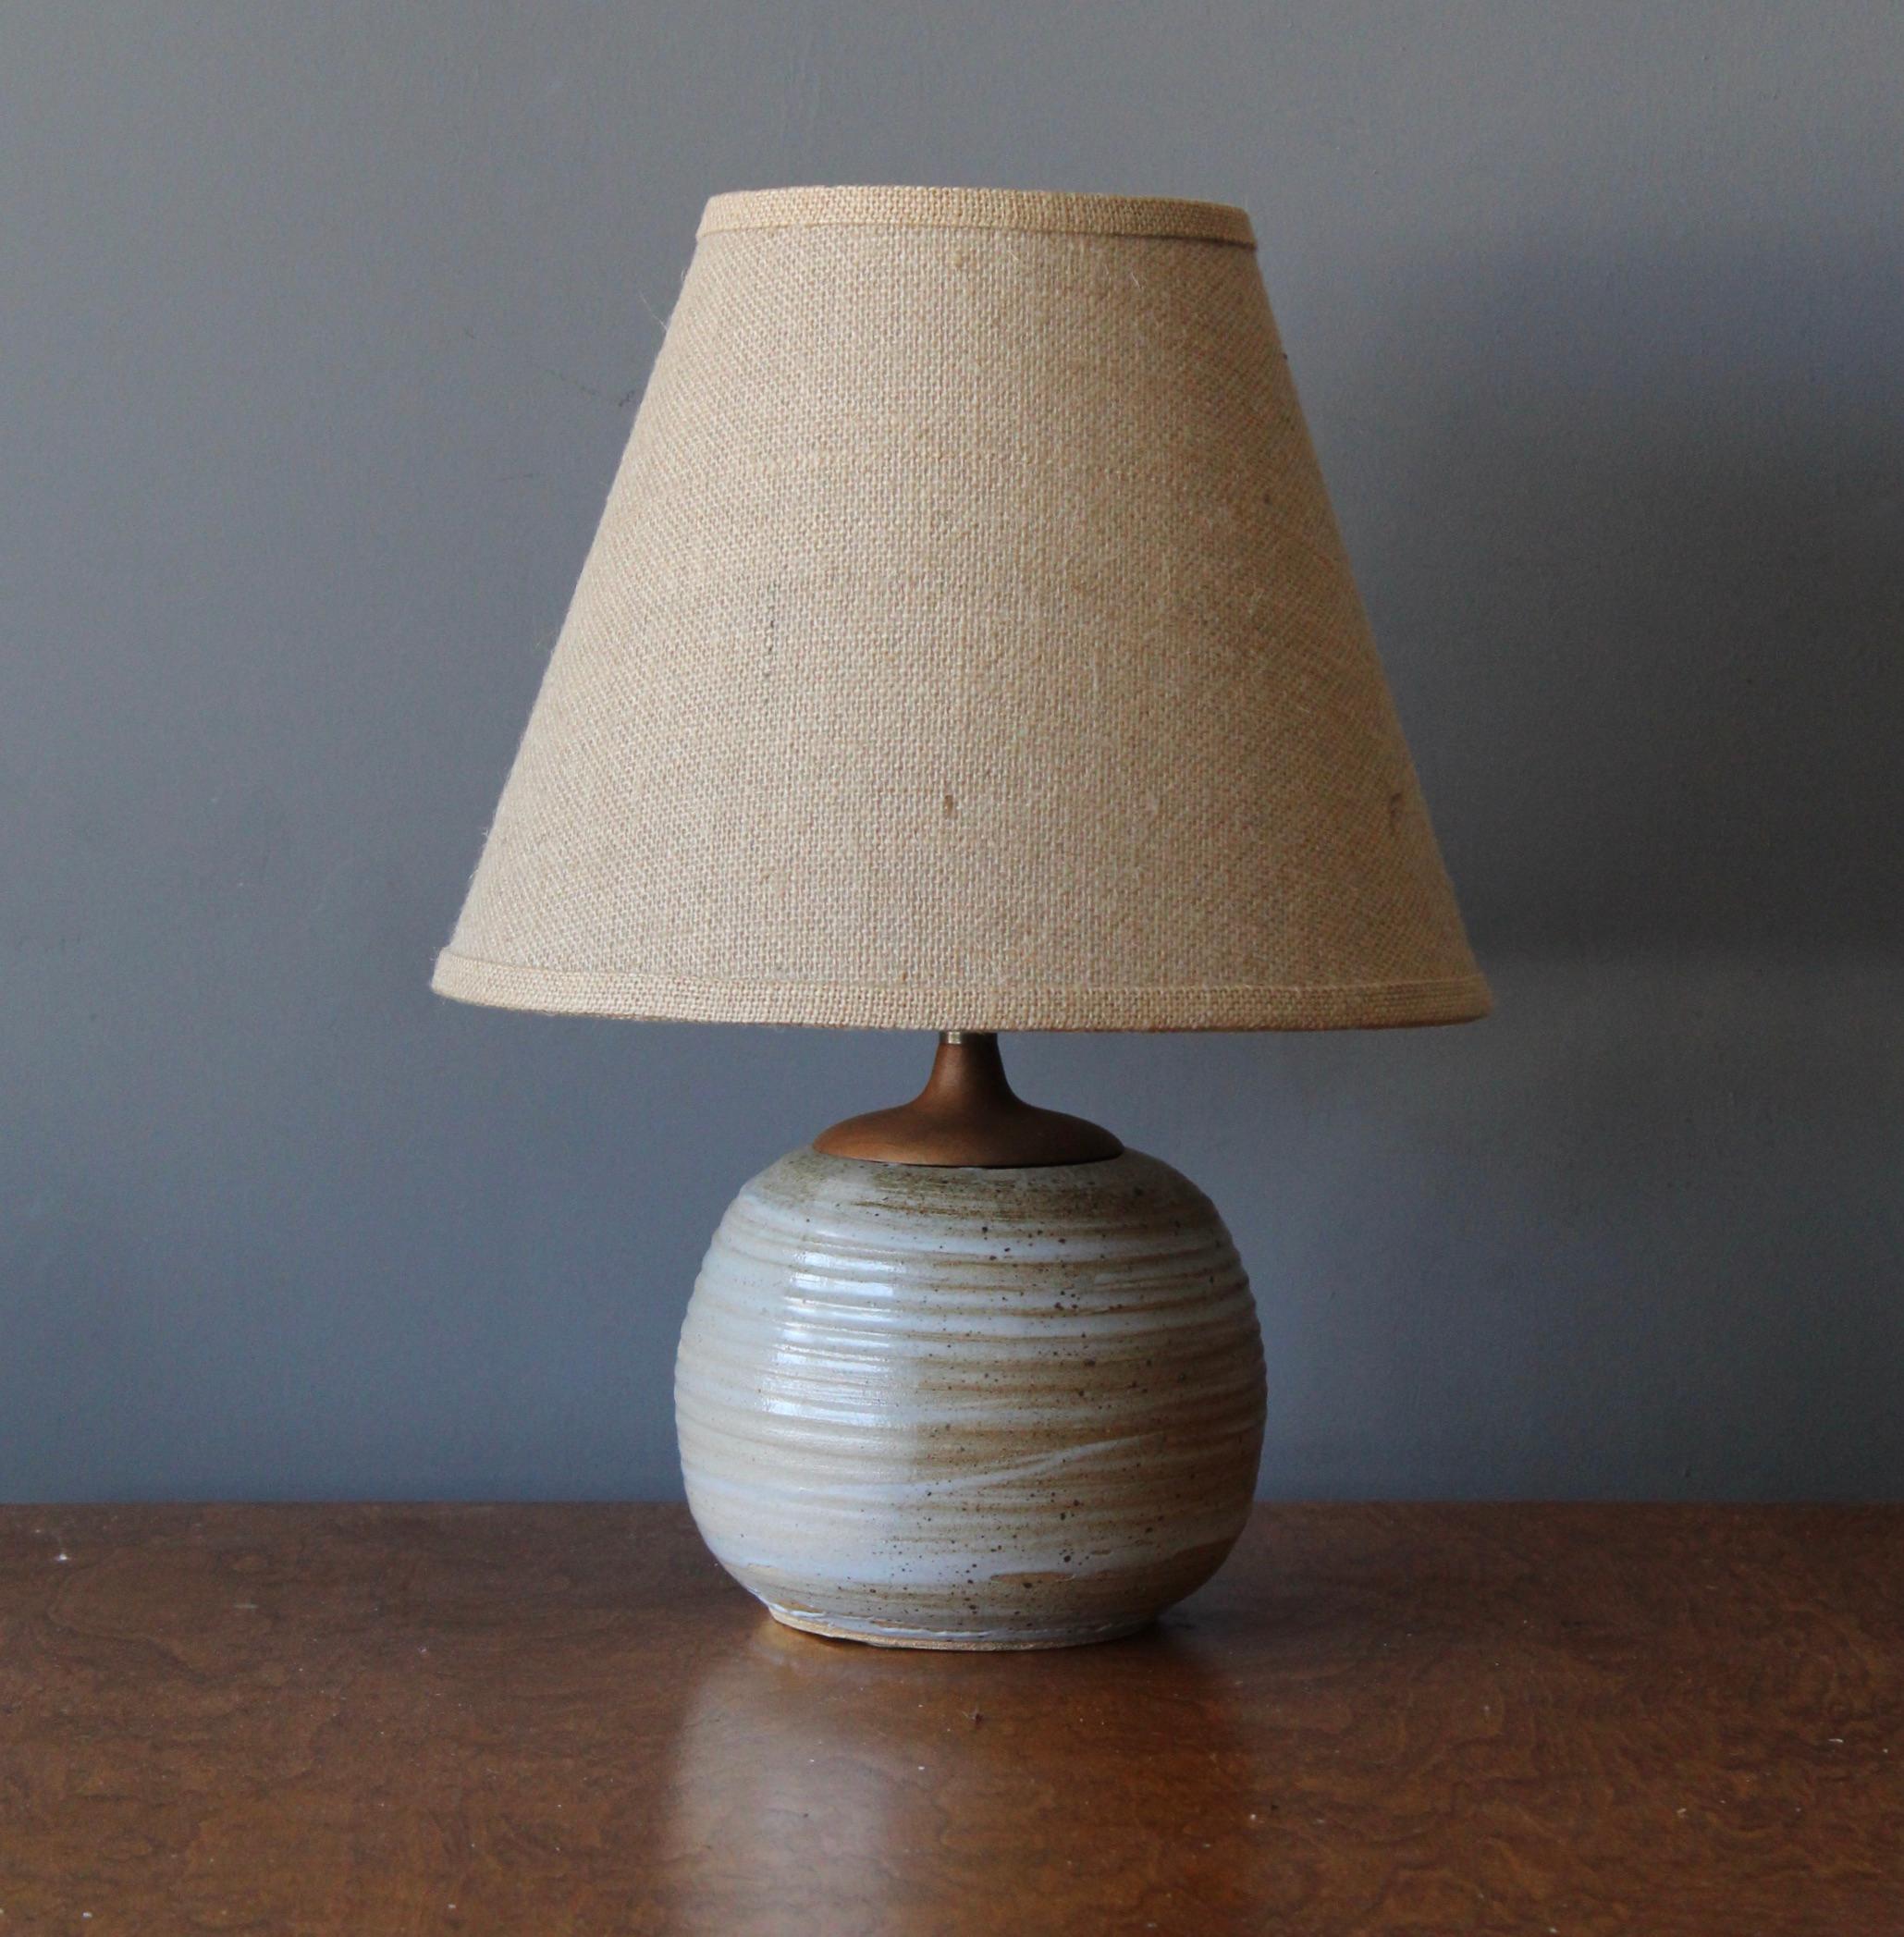 A table lamp. In ceramic, teak and brass. By unknown studio craftsman. 

Stated dimensions exclude lampshade. Height includes socket. Sold without lampshade.

Other designers of the period include Alexandre Knoll, George Nakashima, Isamu